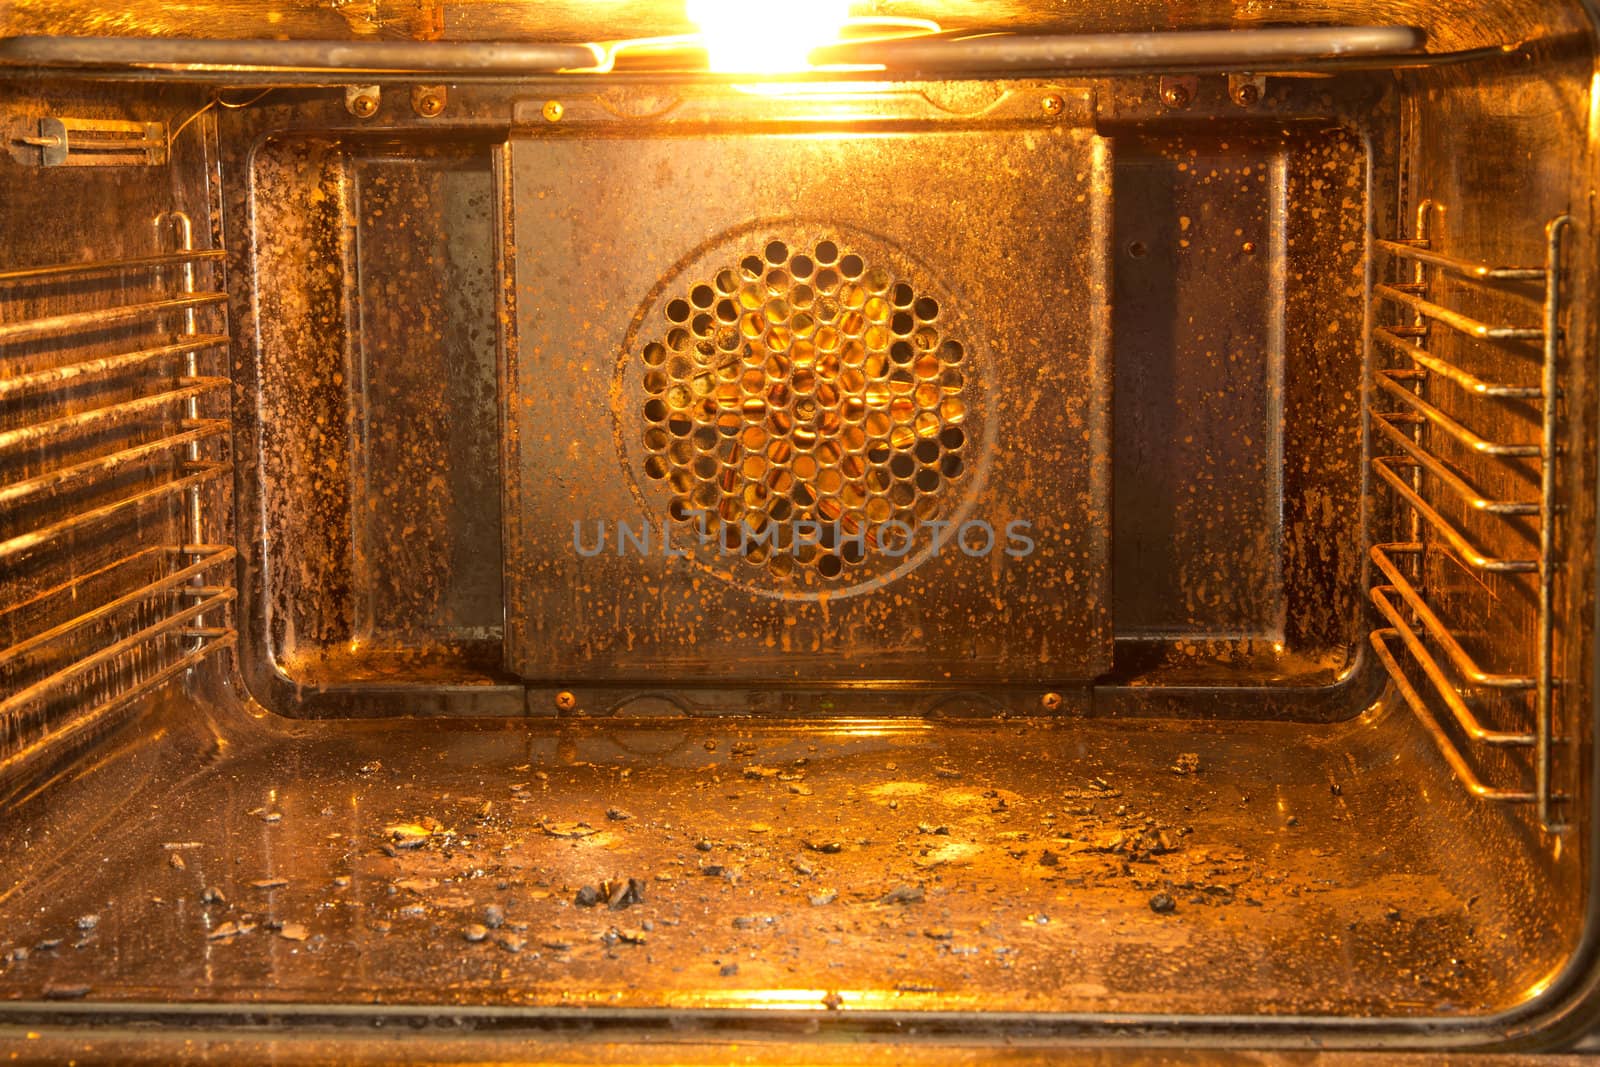 Picture of the inside of a really dirty oven